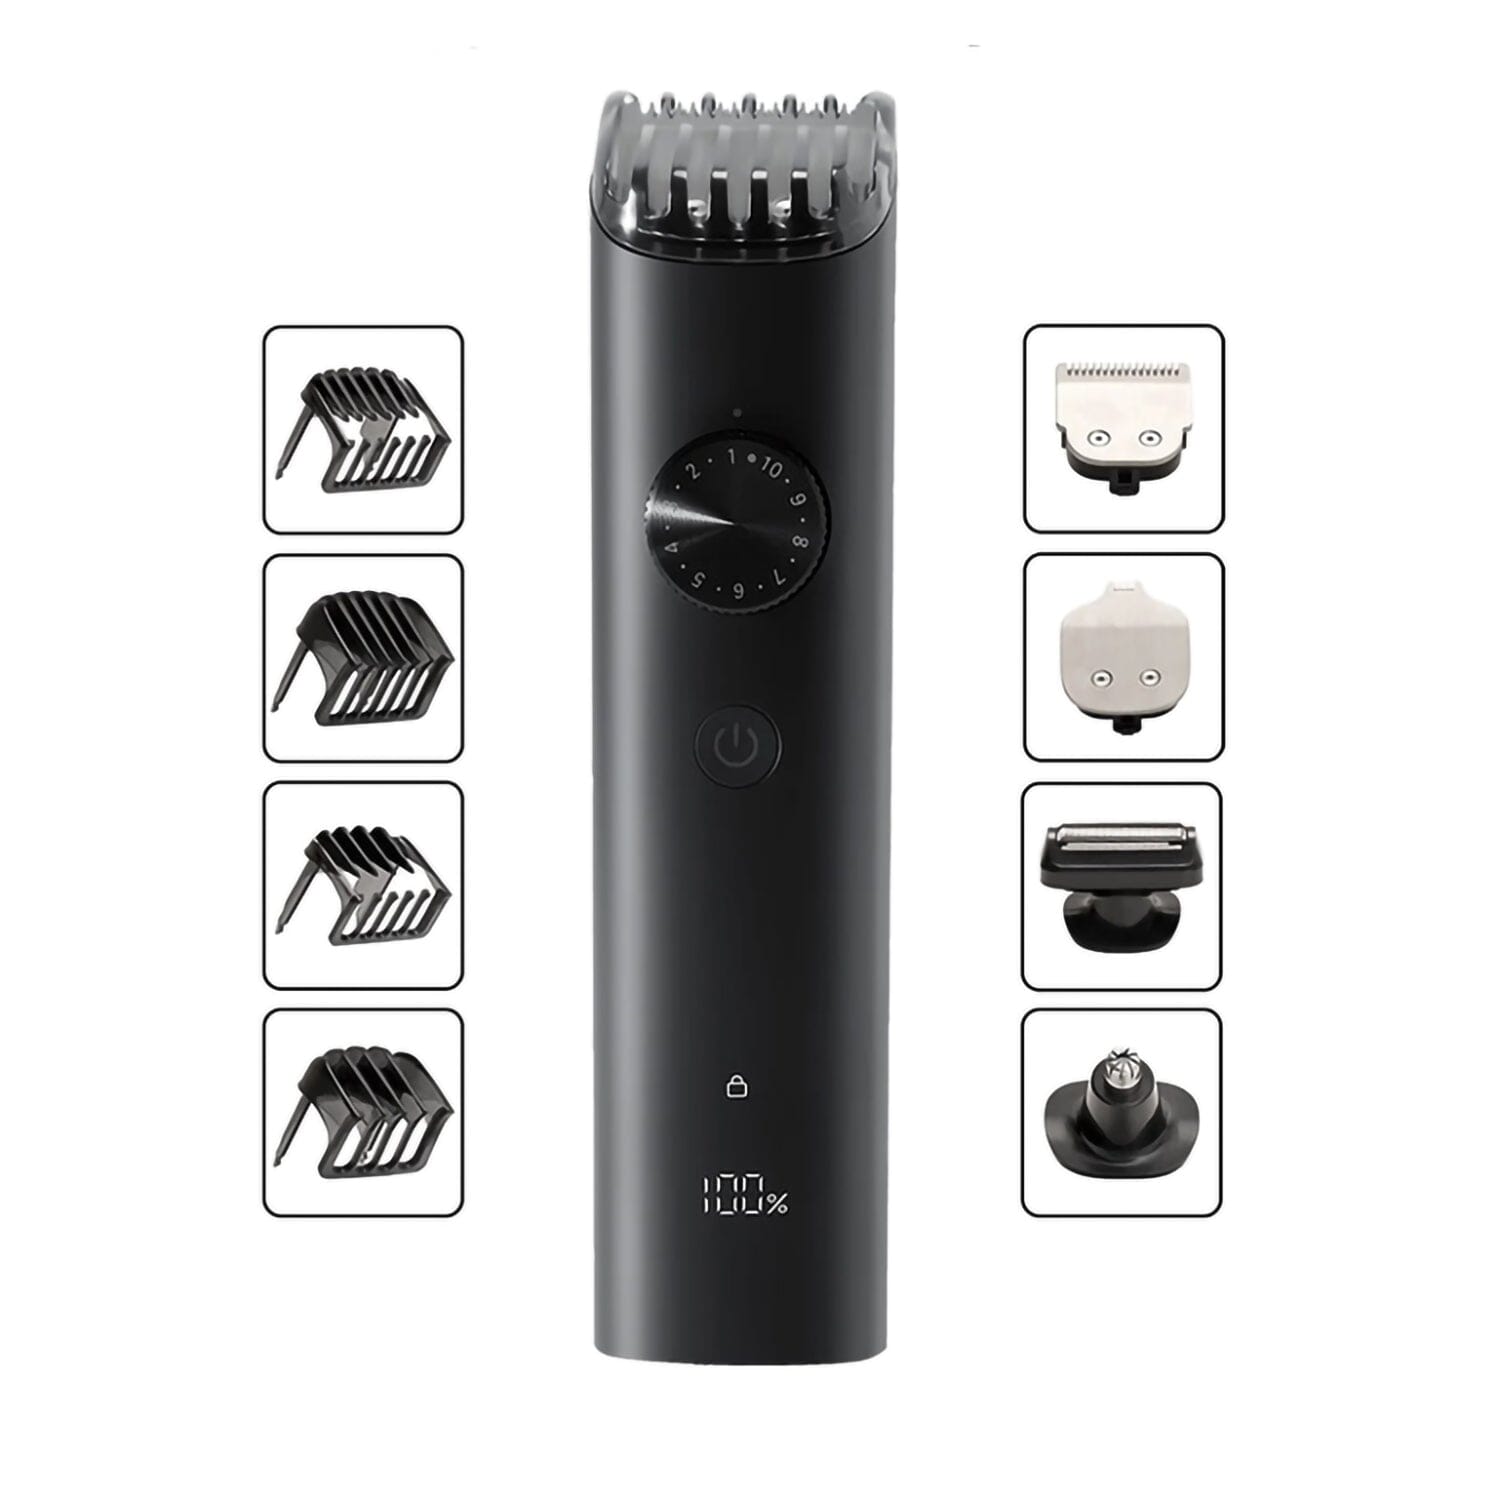 Xiaomi Grooming Kit Pro, Multiple grooming heads, IPX7, for Beard, Body, Face, Nose, and Ear Hair Trimmer, Shaver [Local Official Warranty] Xiaomi 